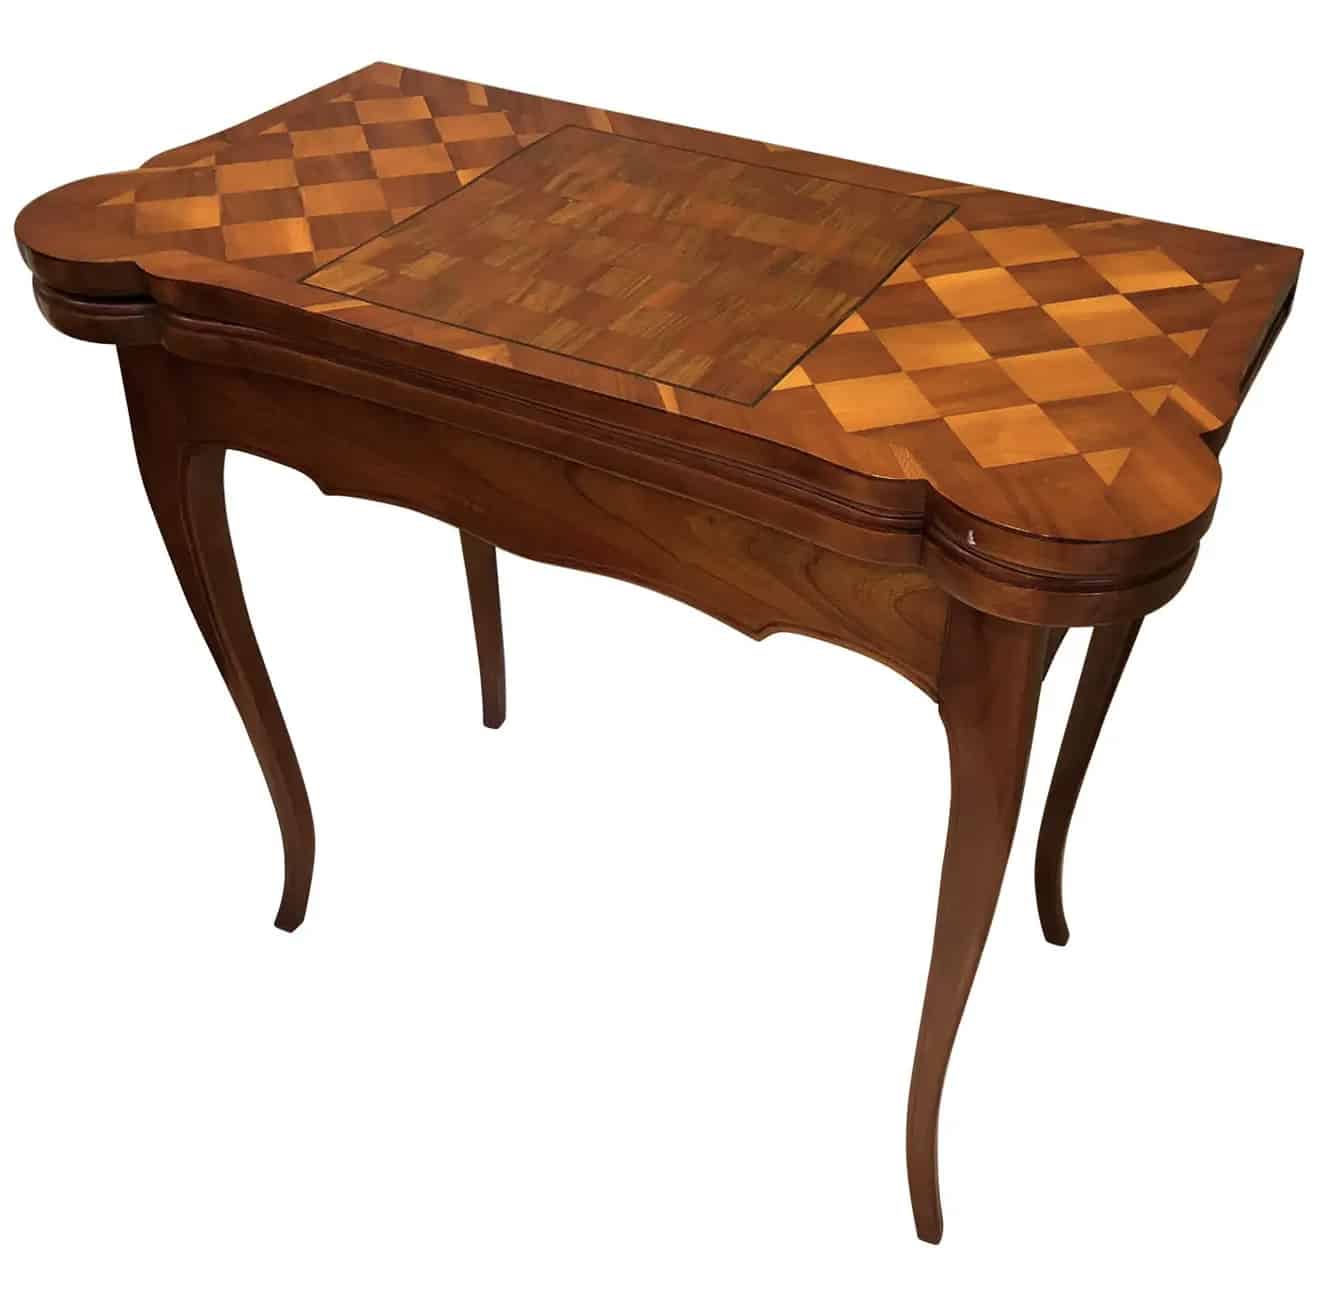 Antique Chess Table: Rich with History, Ready for Play